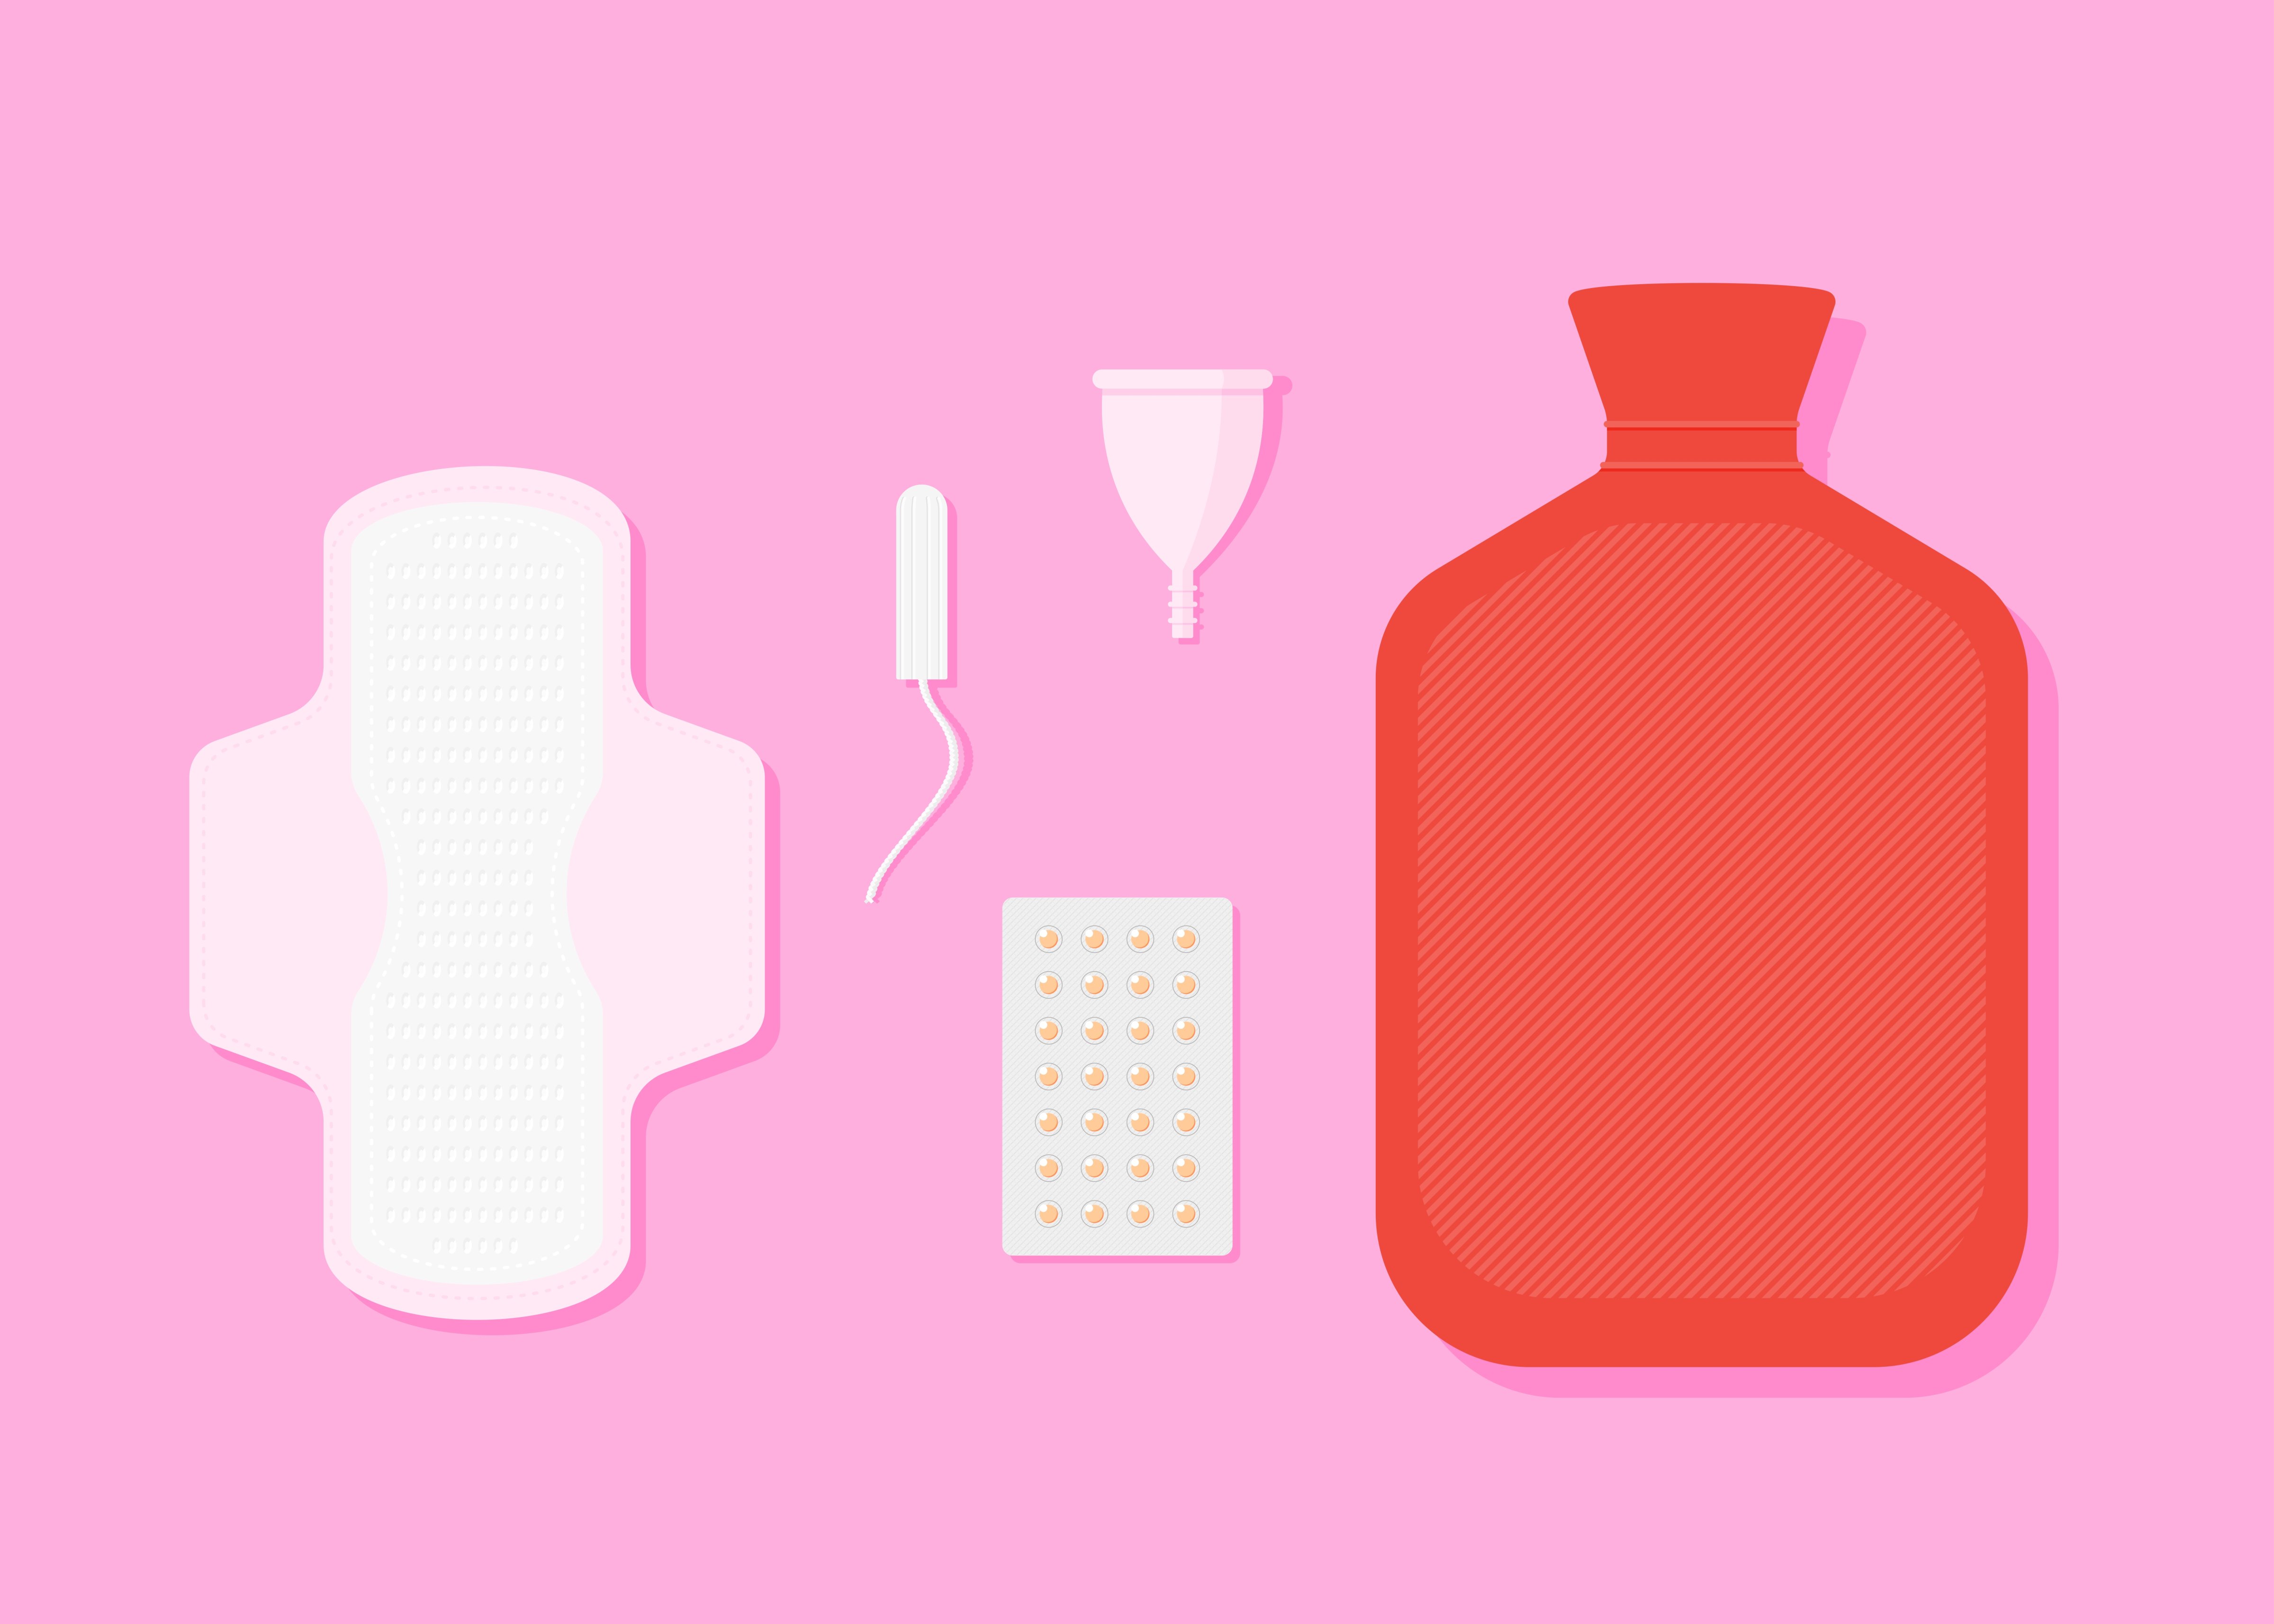 Modern Menstruation - absorbent, tampon, reusable period cup and hot water bottle